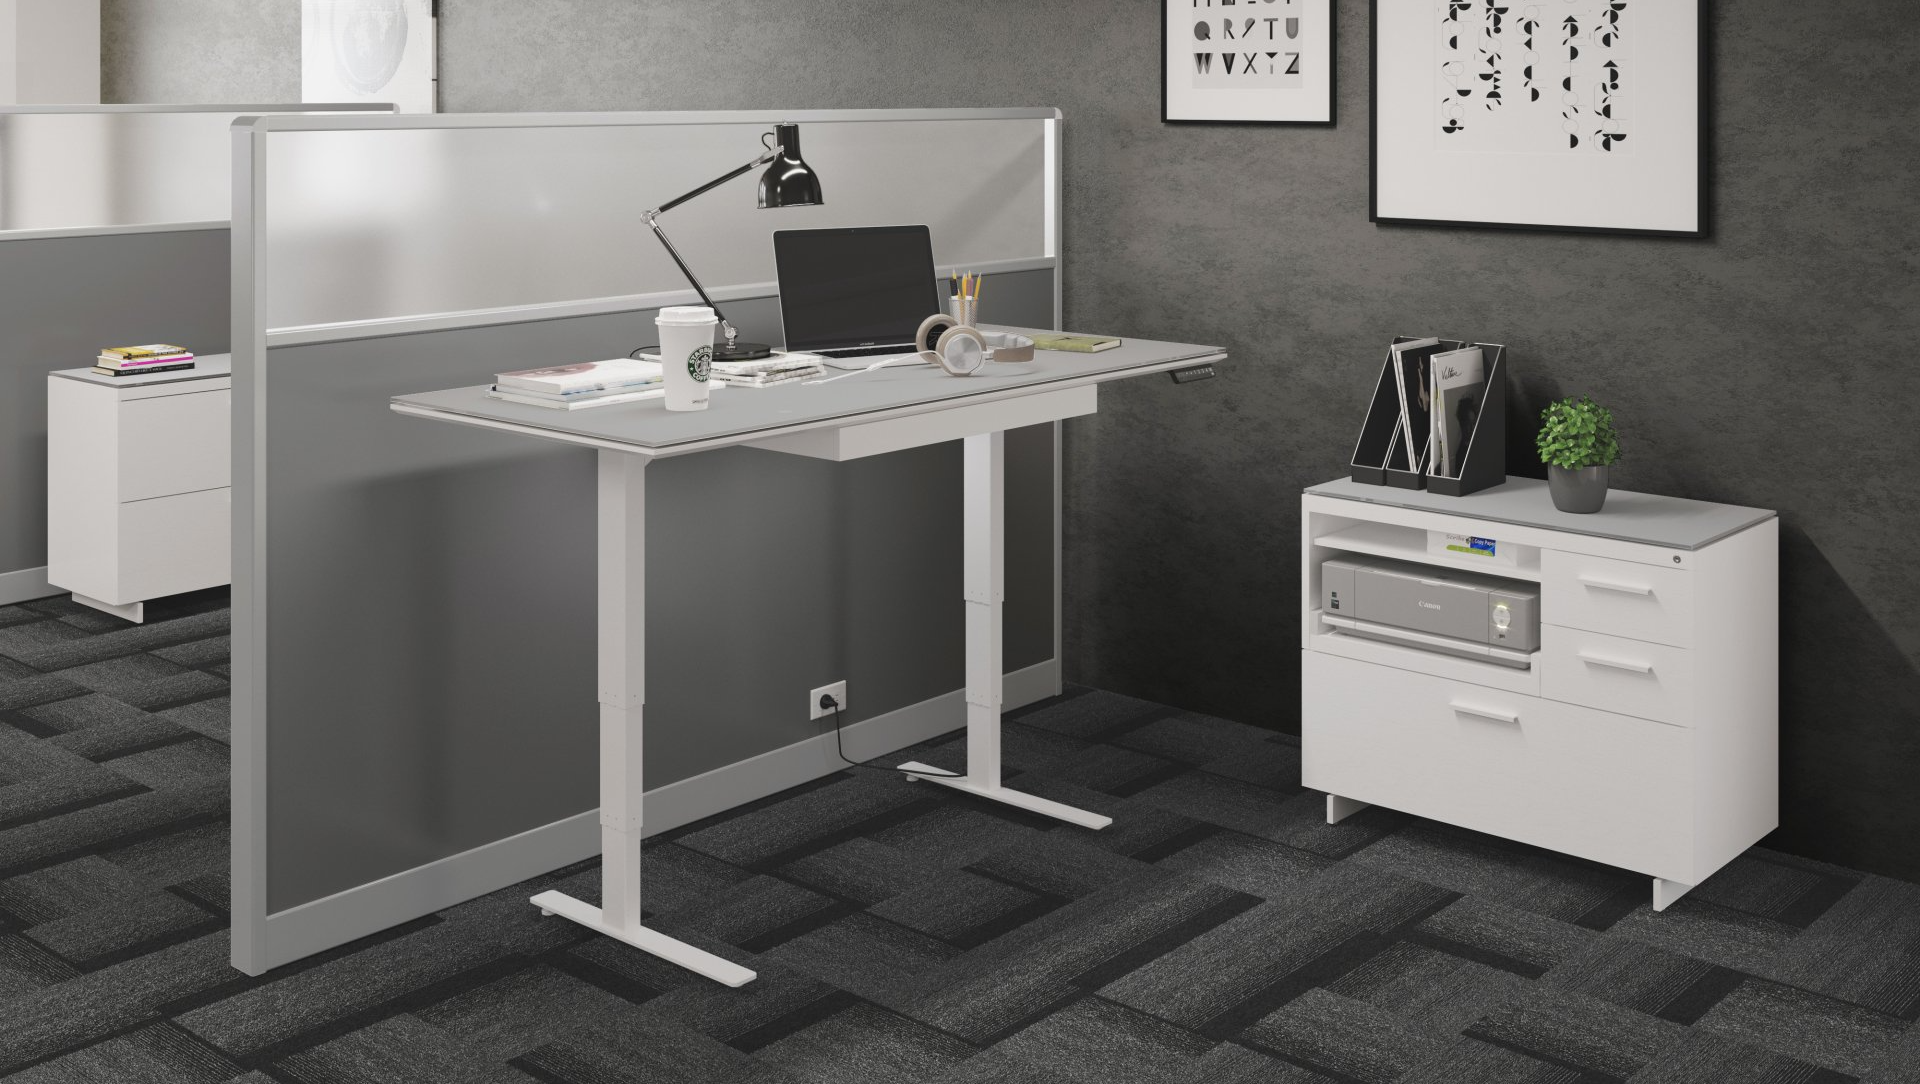 CENTRO Lift OFFICE FURNITURE COLLECTION